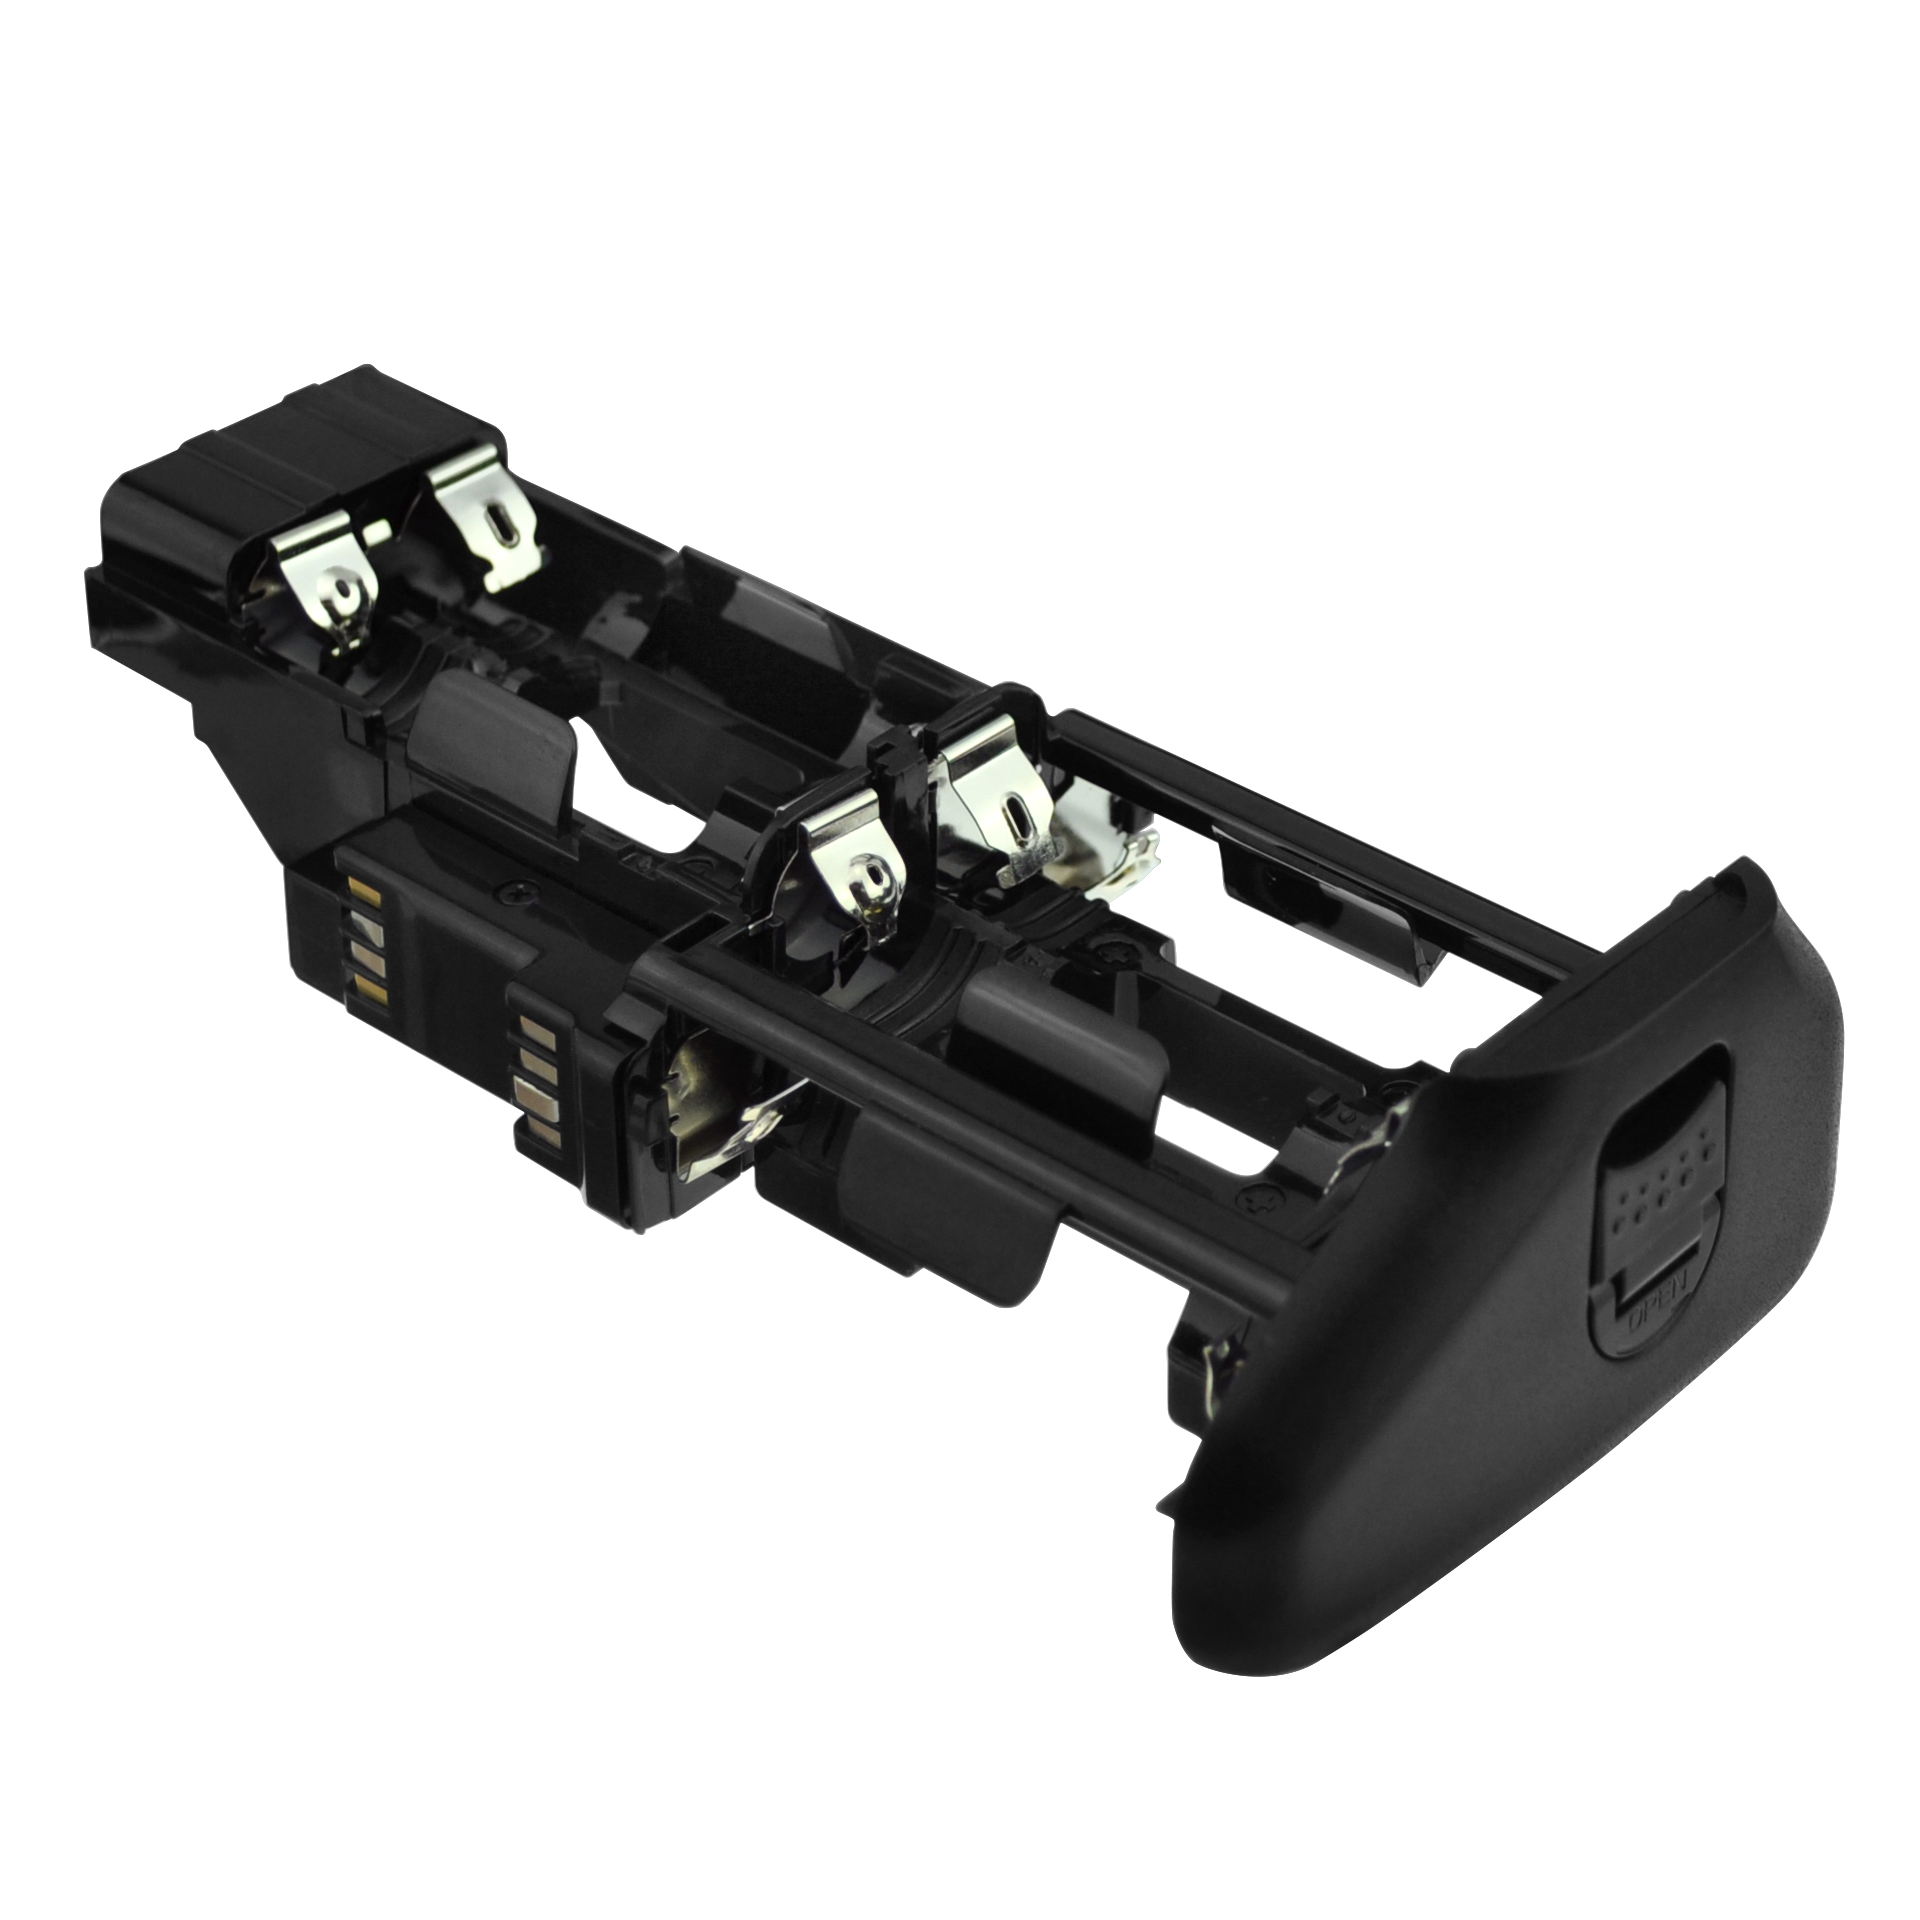 Pro series Multi-Power Battery Grip For Canon EOS 7D Mark II